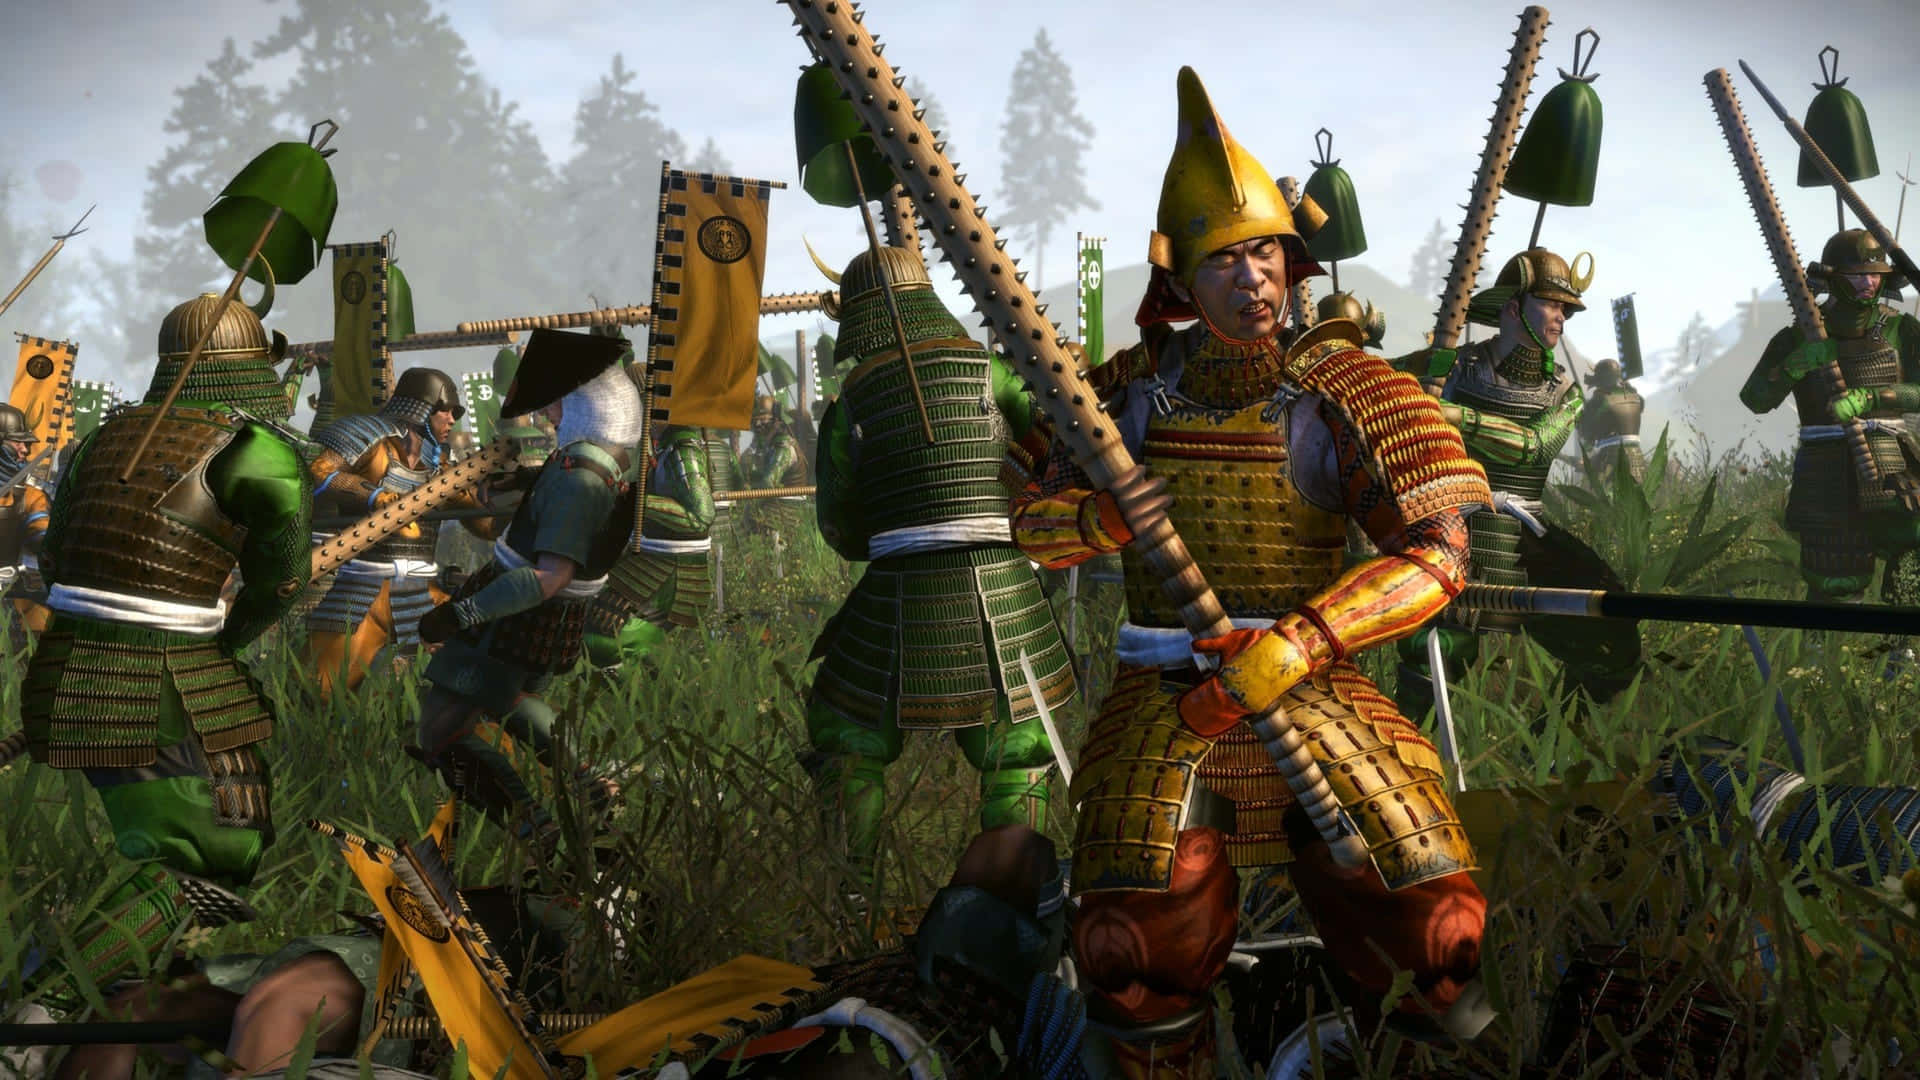 'Experience an epic Japan-based strategy game with Total War: Shogun 2'